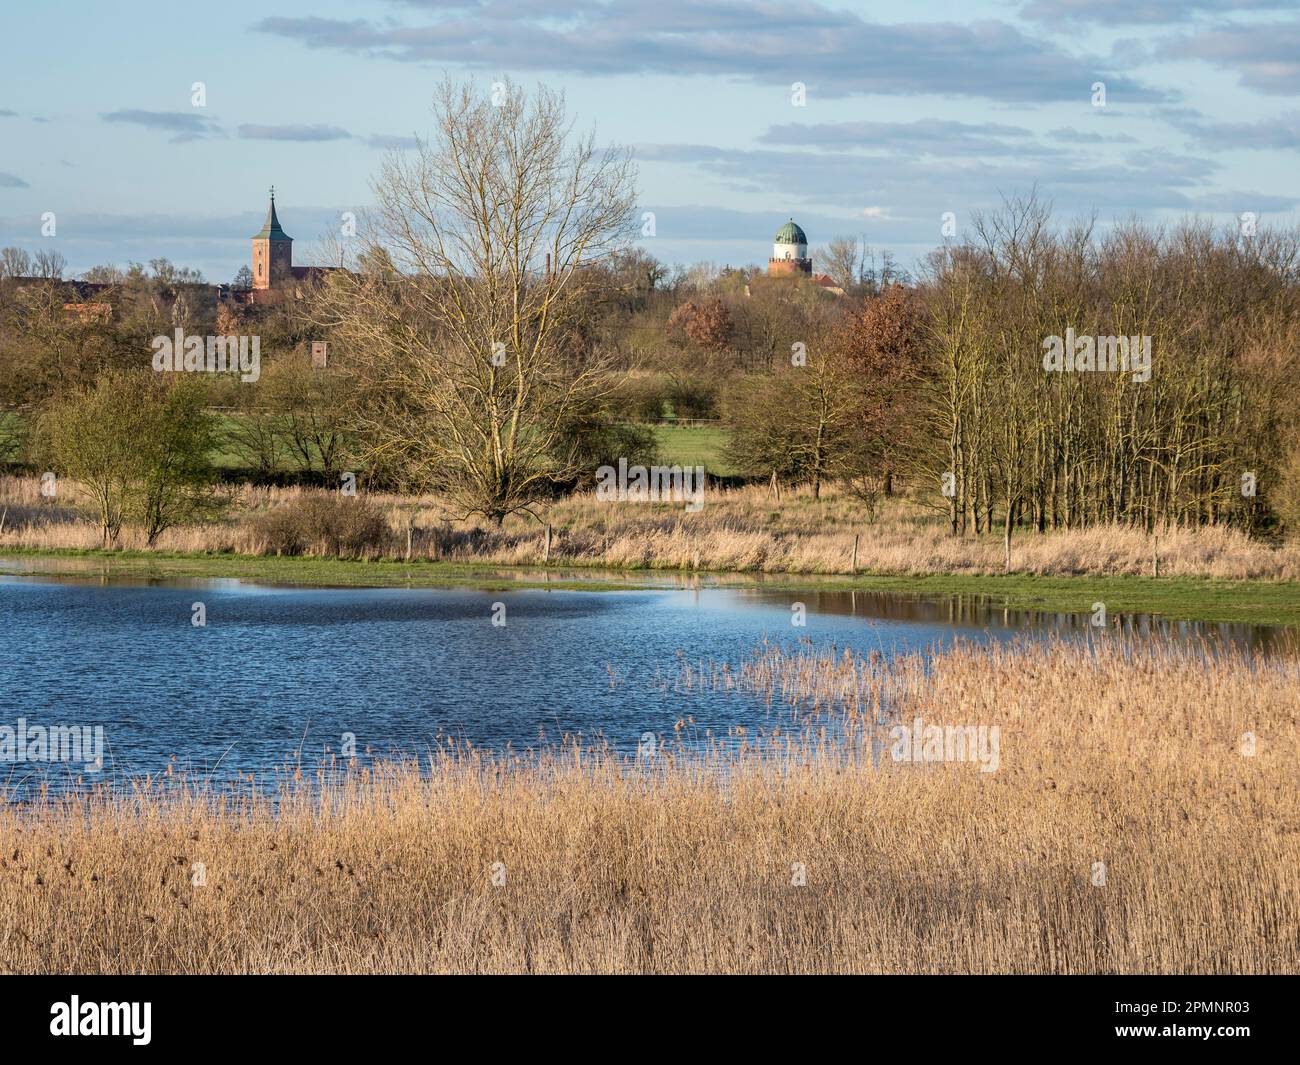 East bank of the Elbe River, along Elbe cycle route, floodplain at  village Lenzen, Germany Stock Photo